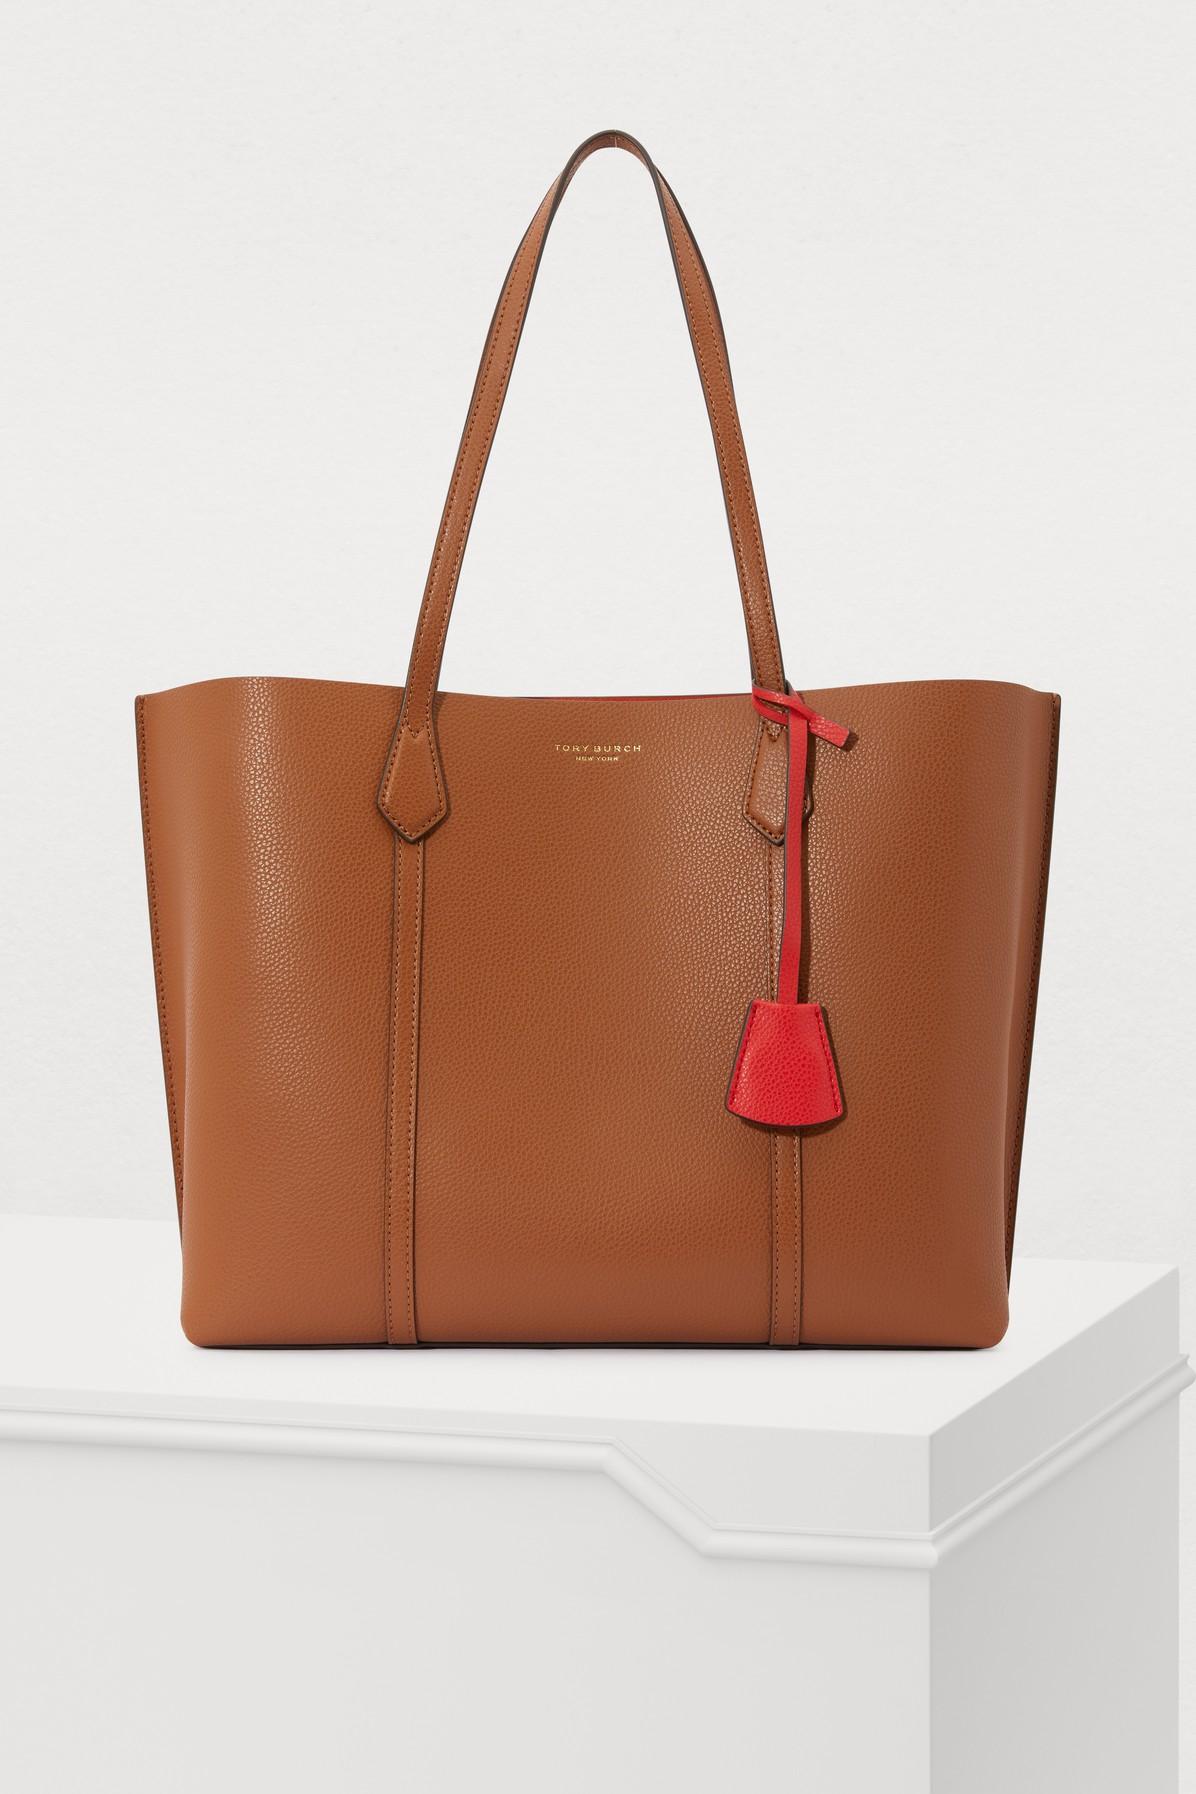 Tory Burch Perry Tote Bag in Brown - Lyst